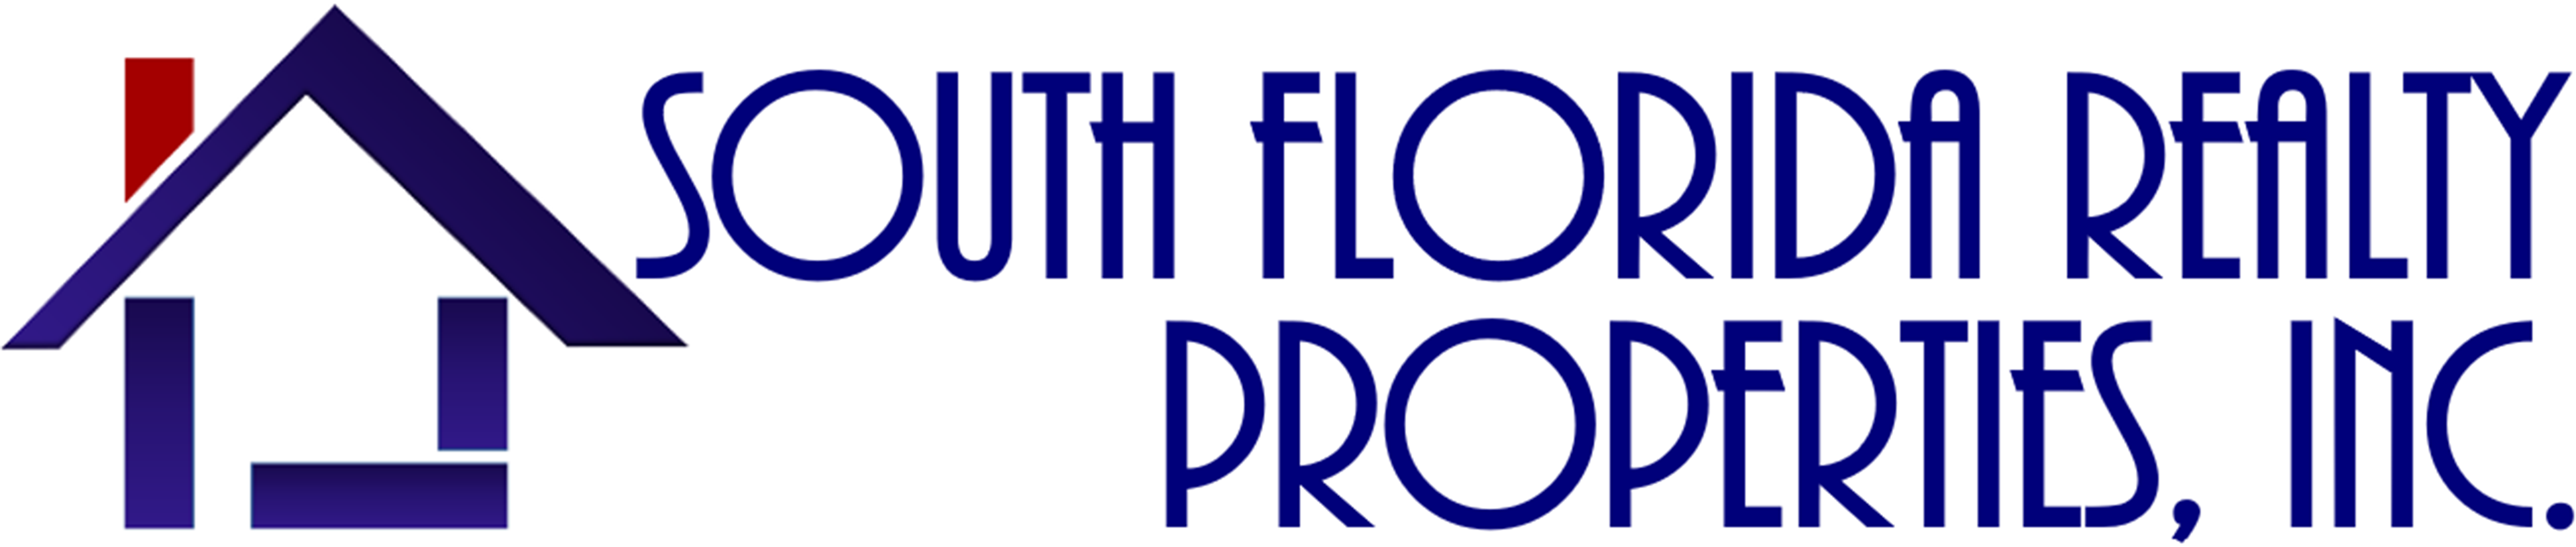 South Florida Realty Properties